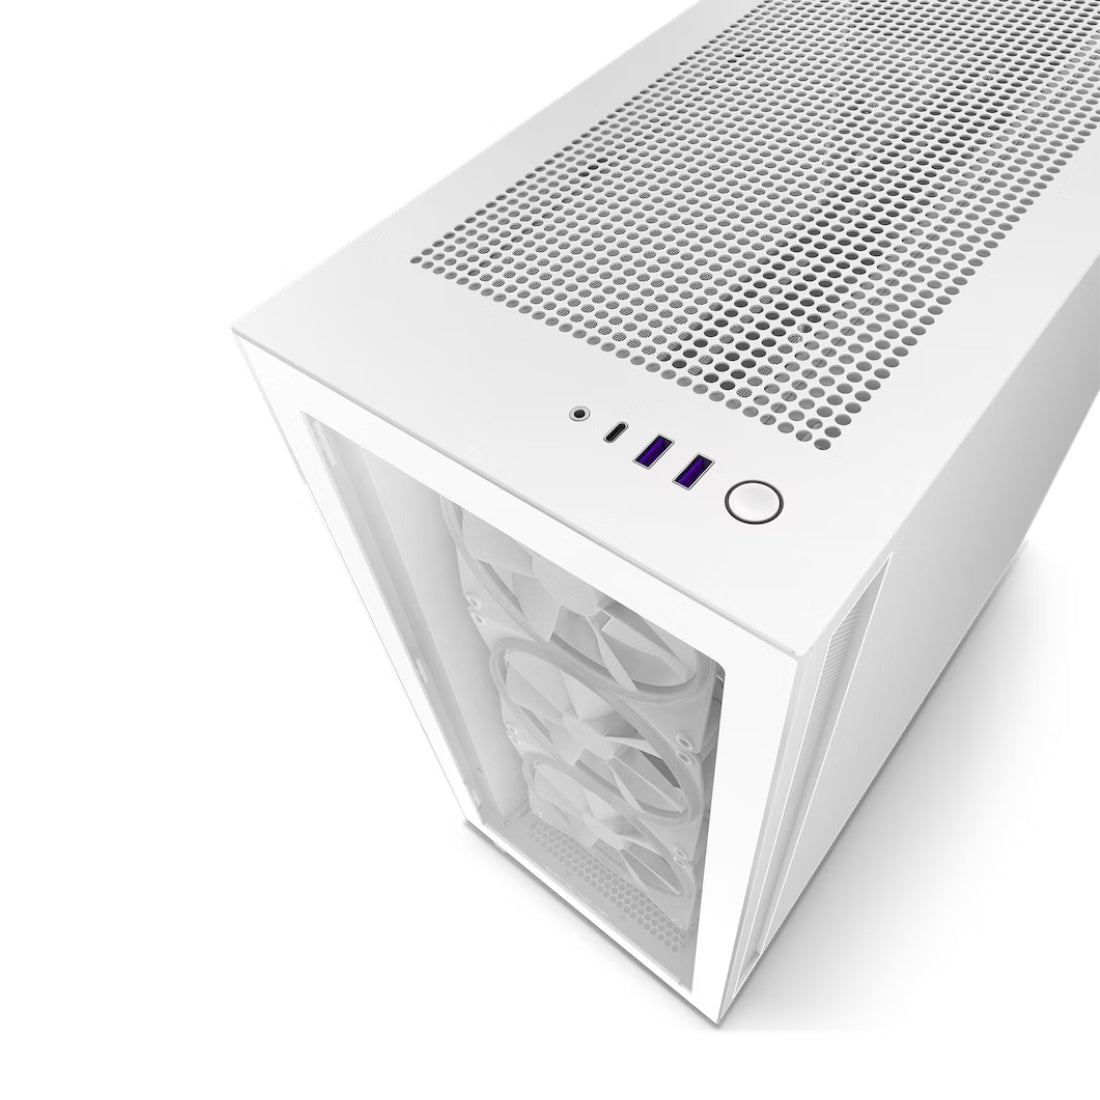 NZXT H7 Elite ATX Mid Tower Case - White - صندوق - Store 974 | ستور ٩٧٤